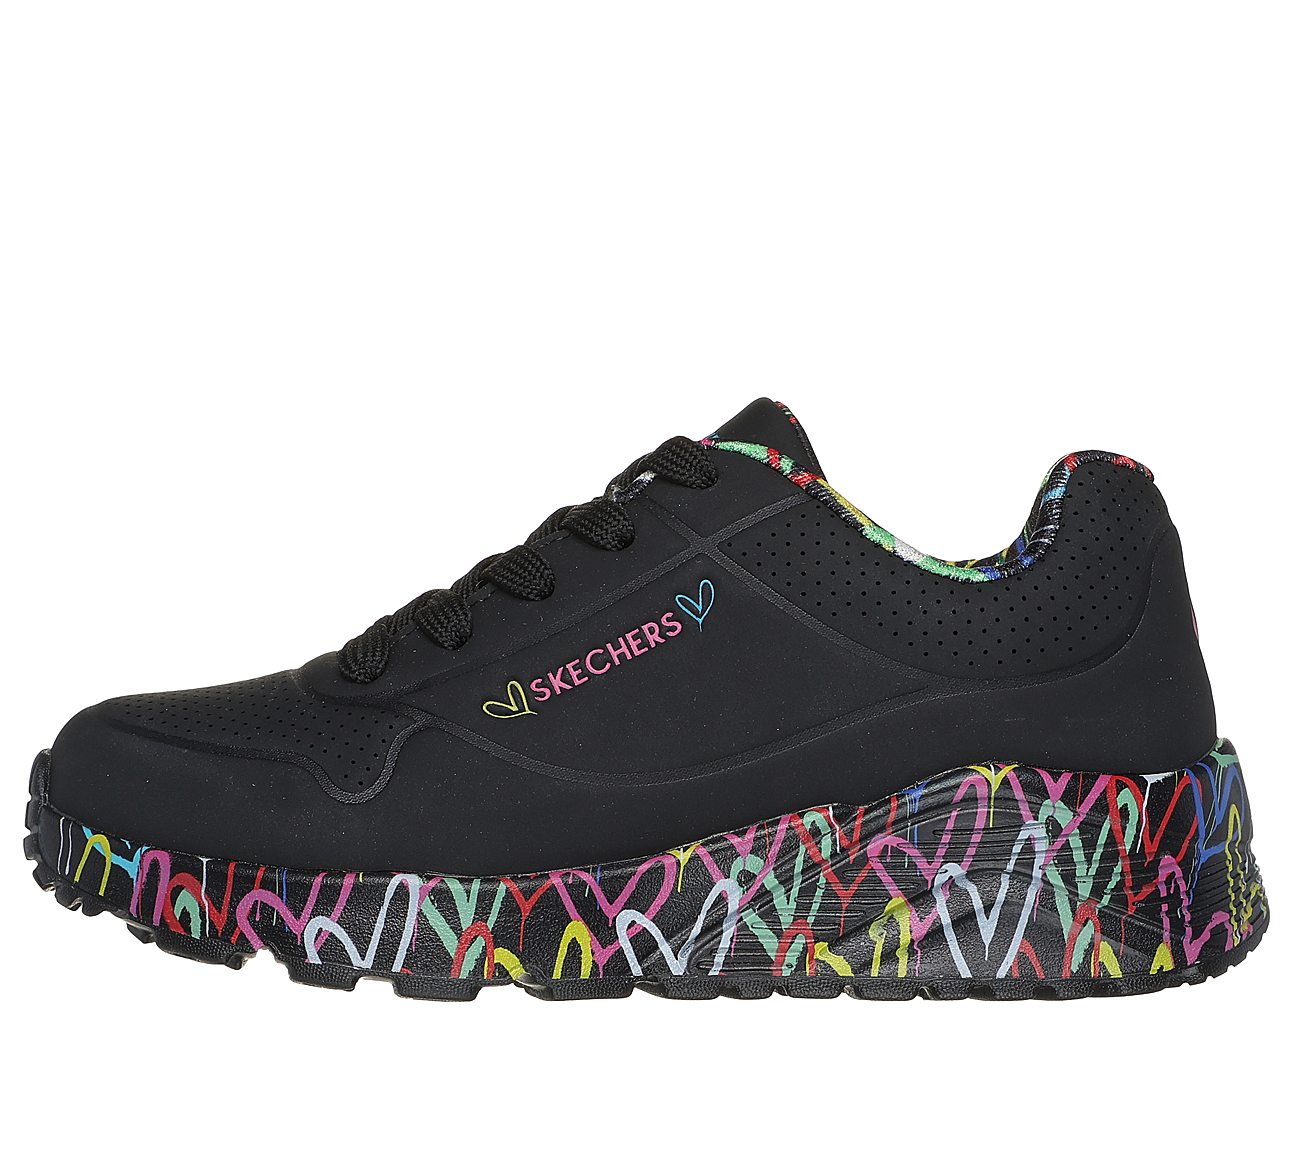 UNO LITE - LOVELY LUV, BLACK/MULTI Footwear Lateral View